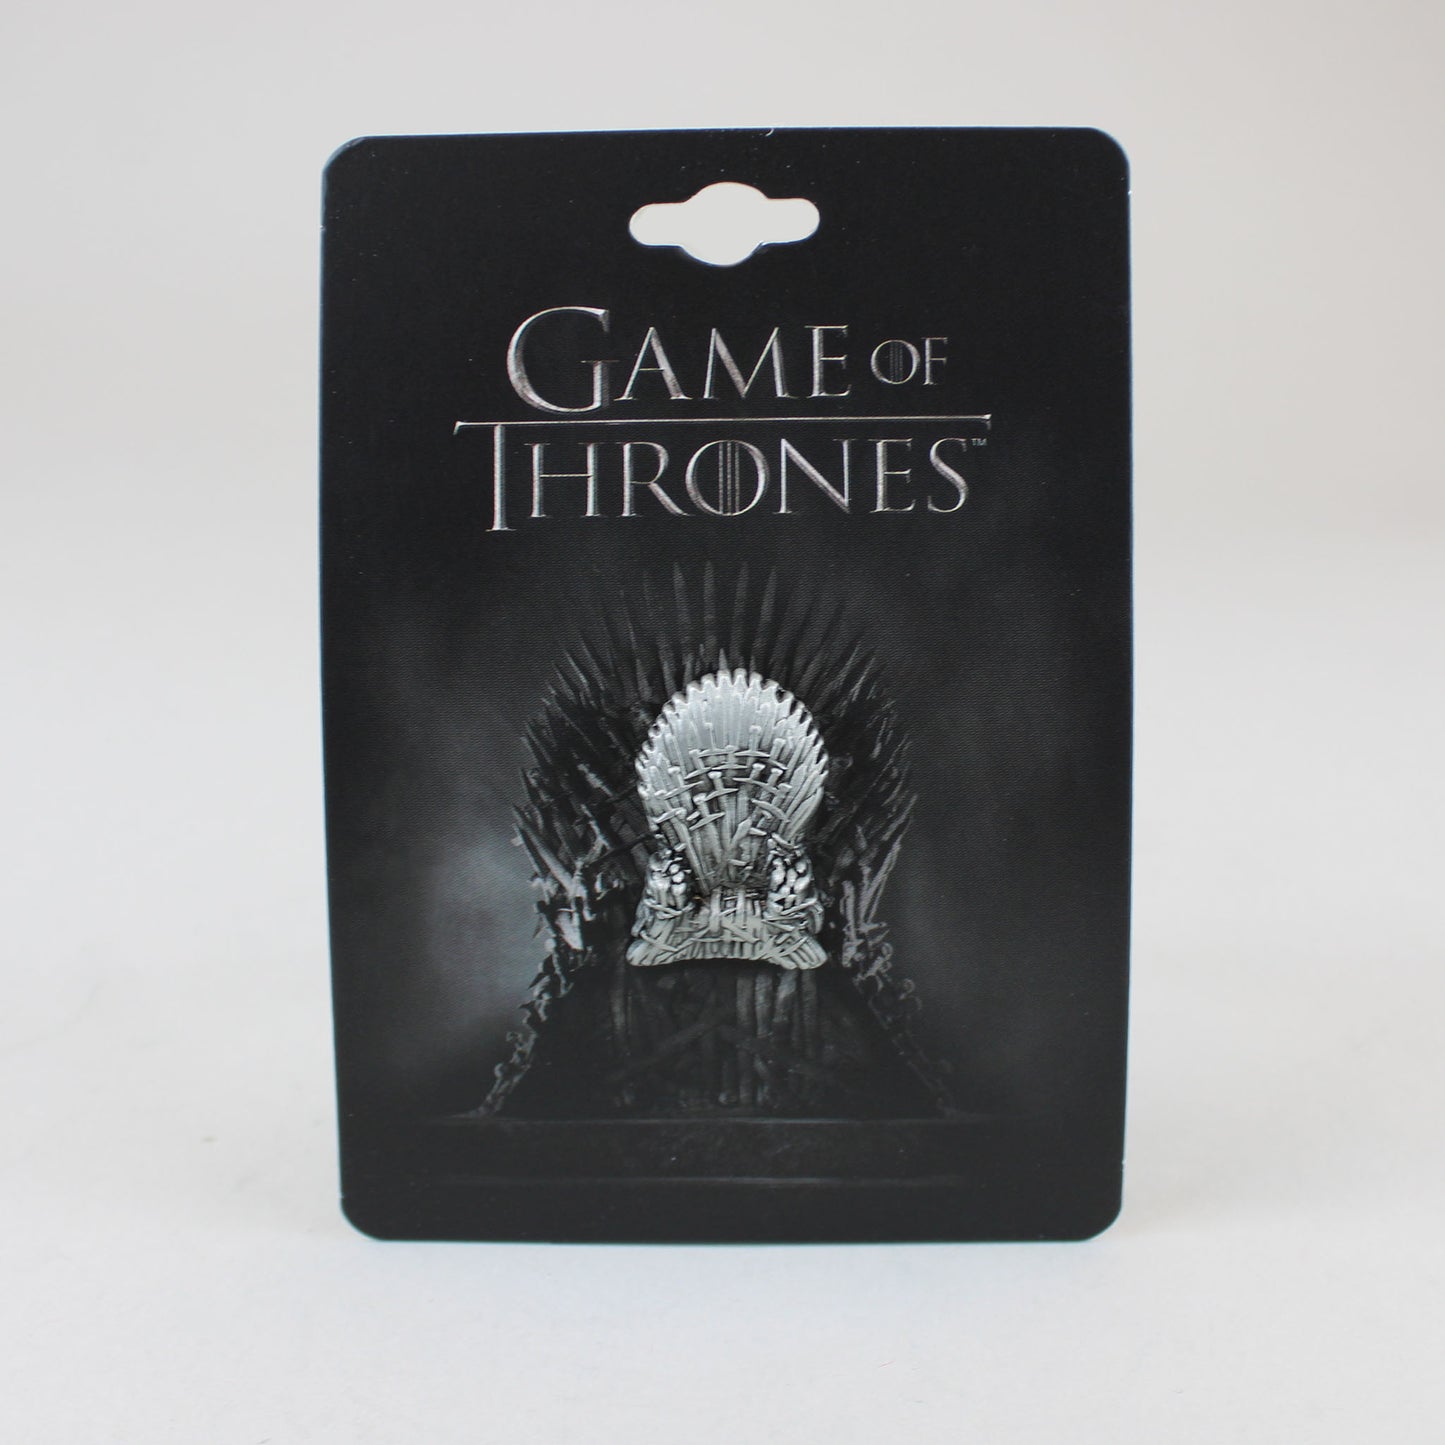 The Iron Throne (Game of Thrones) 3D Sculpted Metal Pin